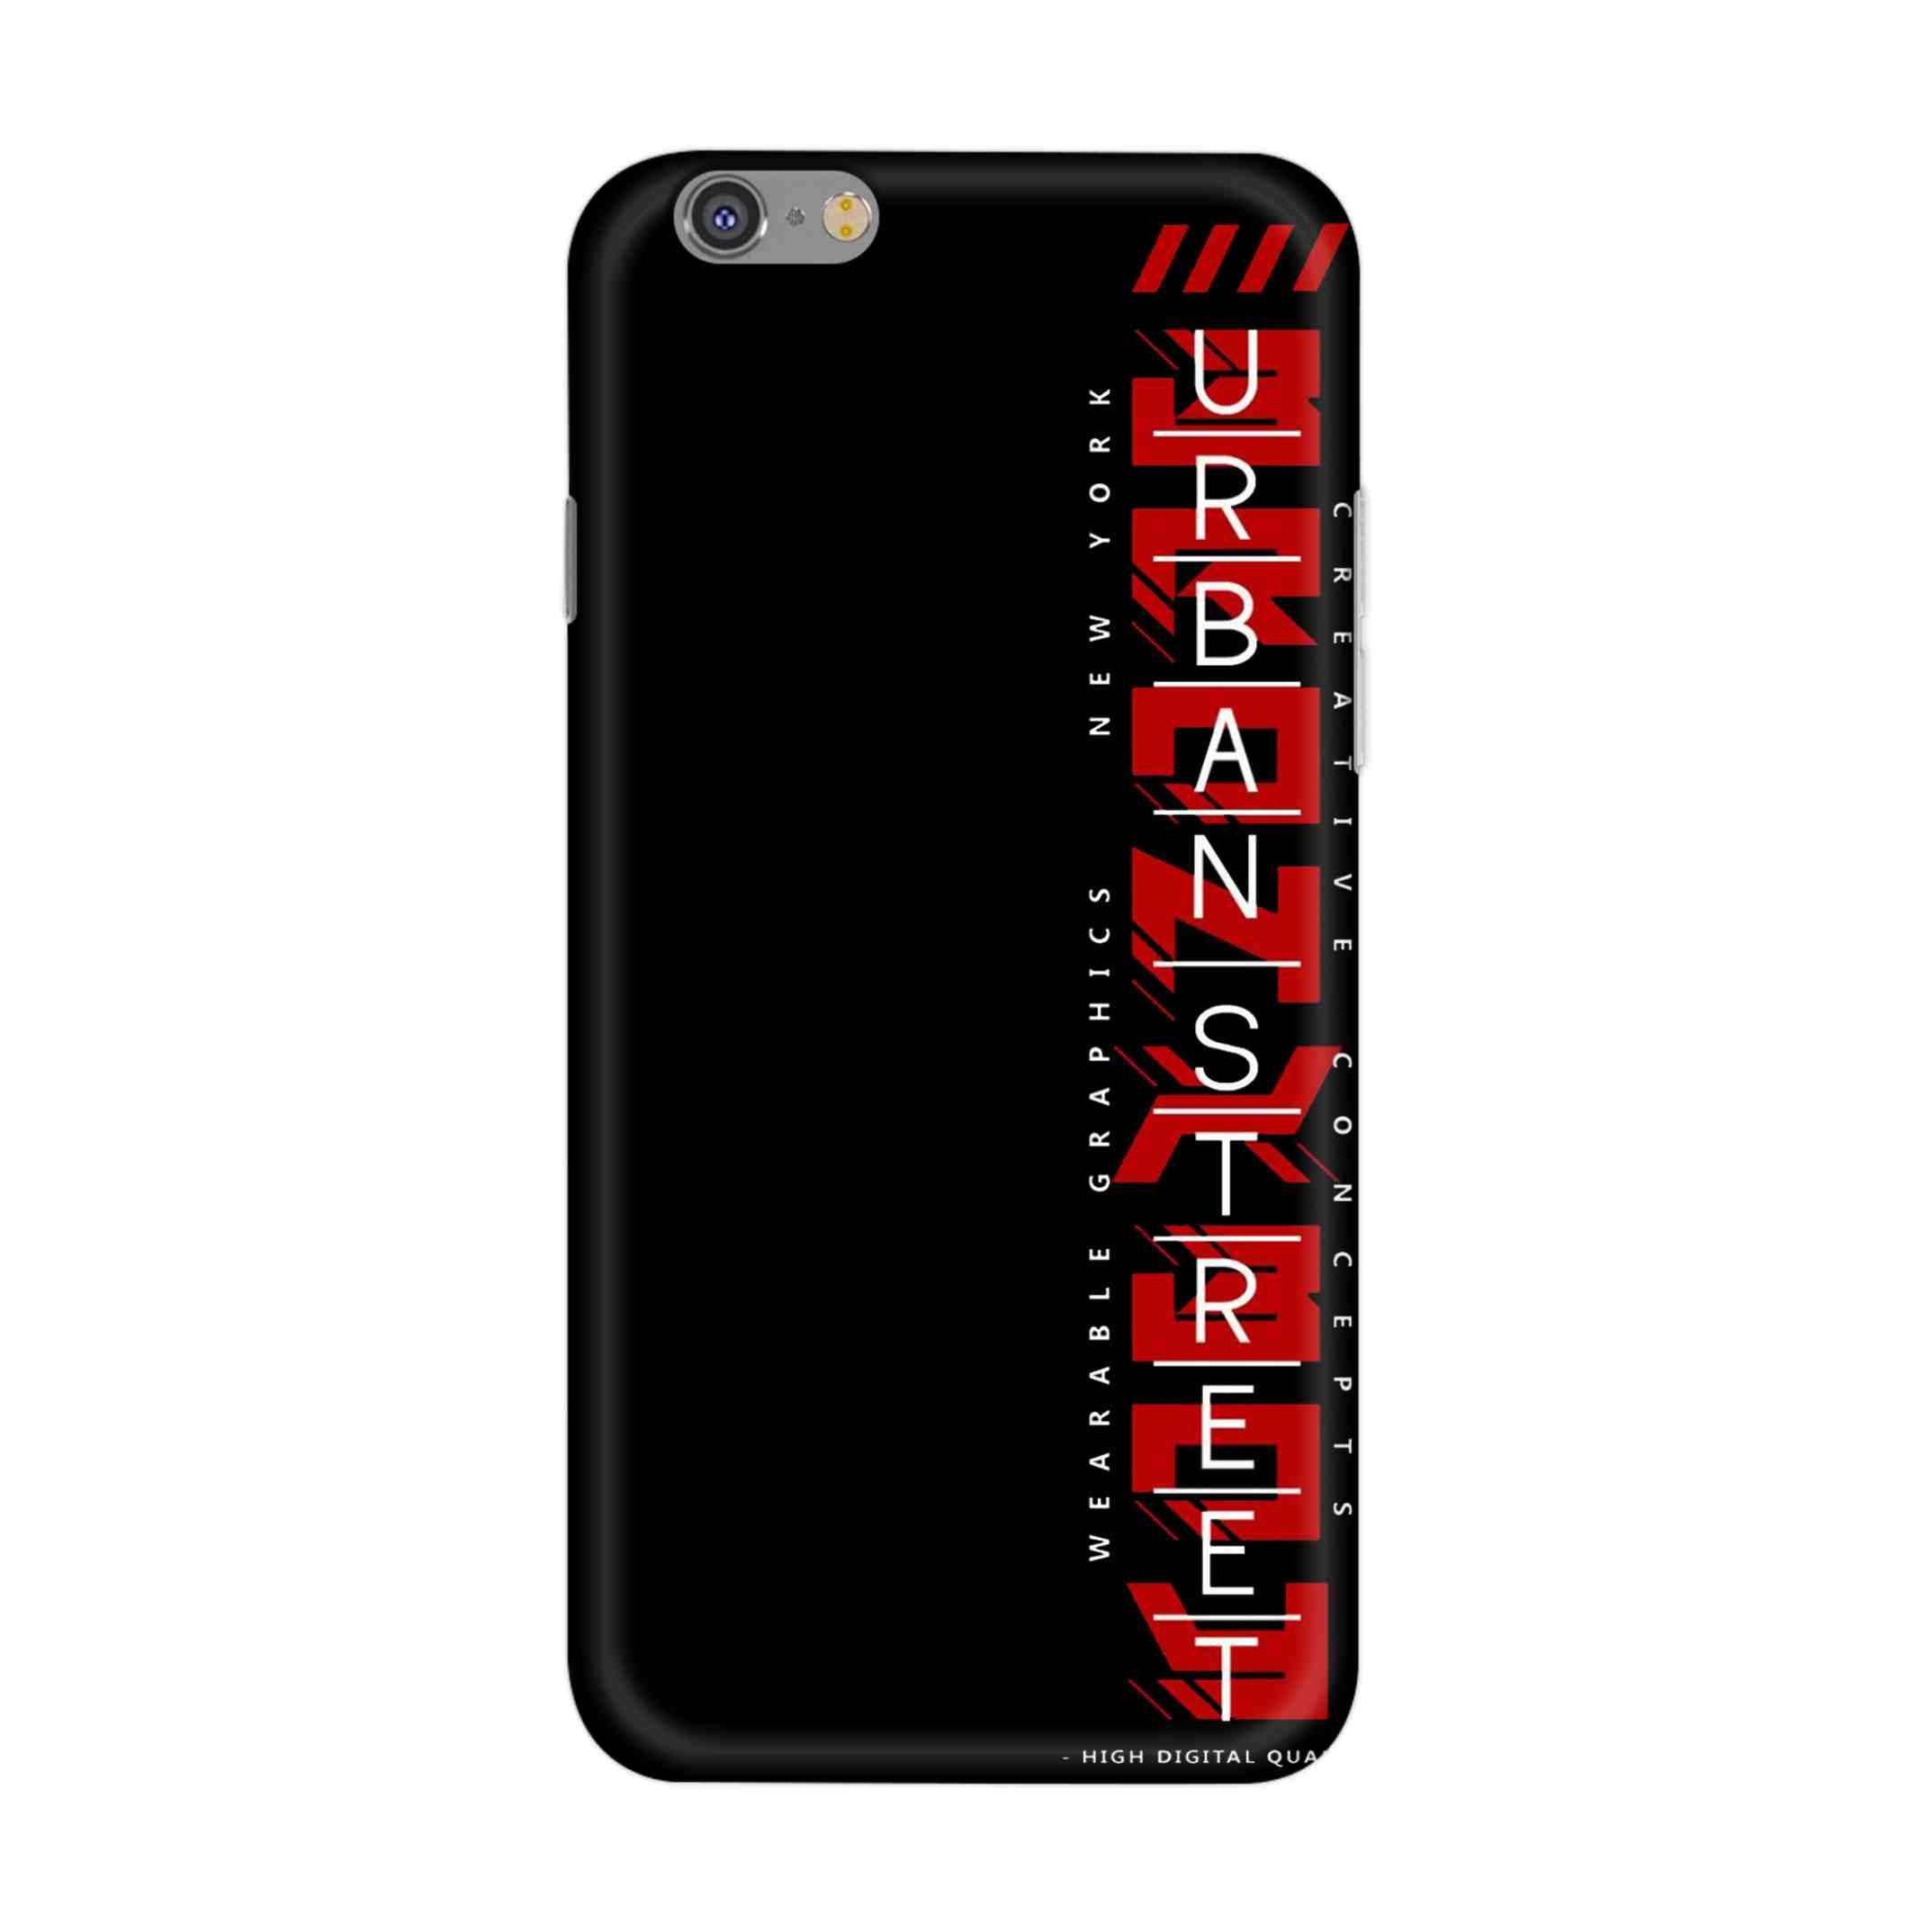 Buy Urban Street Hard Back Mobile Phone Case/Cover For iPhone 6 / 6s Online